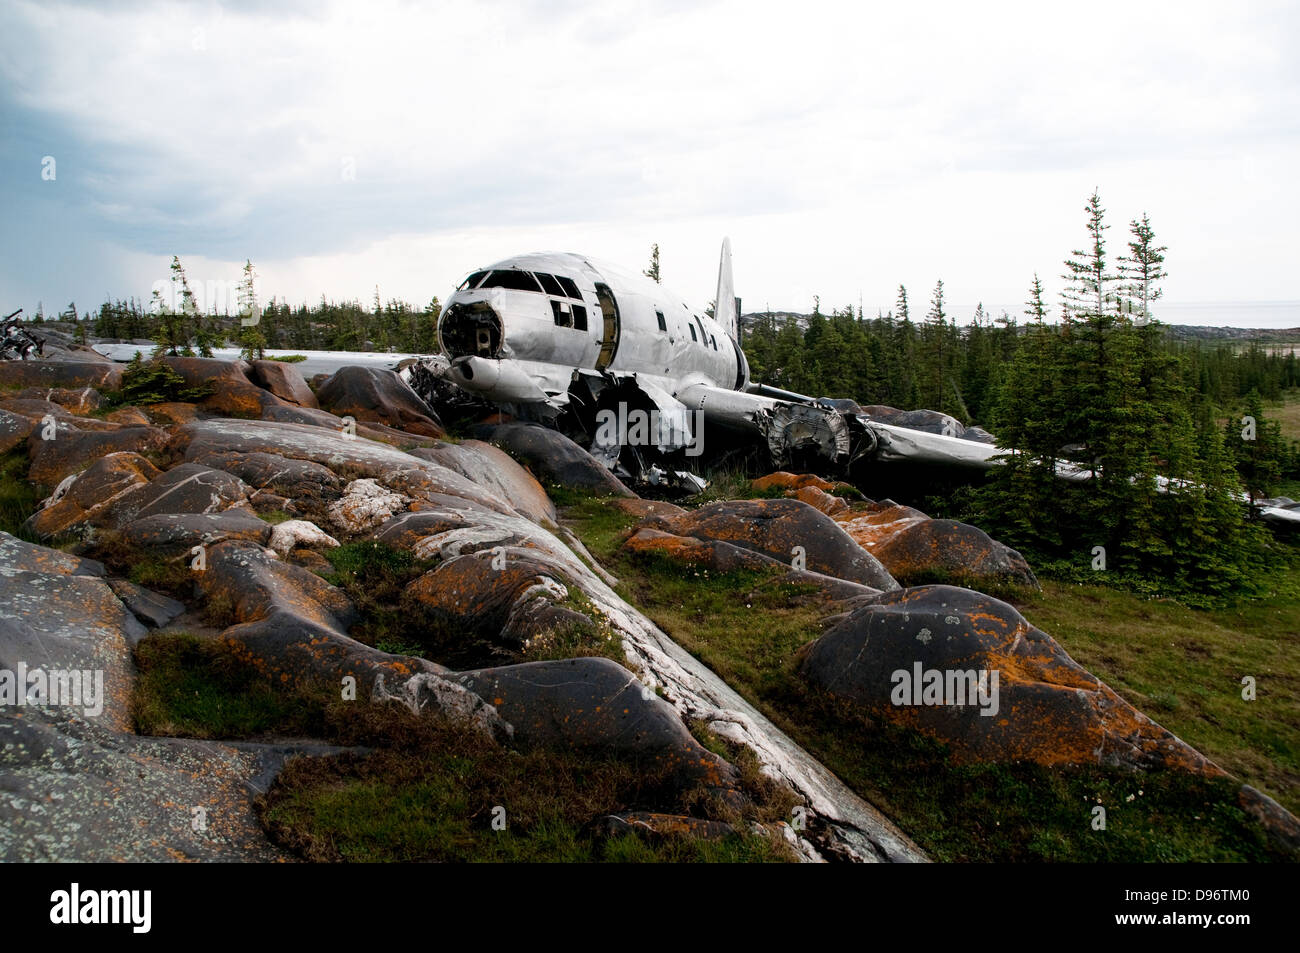 The C-46 plane crash site and wreckage known as the 'Miss Piggy,' which crashed in November 1979 outside the town of Churchill, Manitoba, Canada. Stock Photo